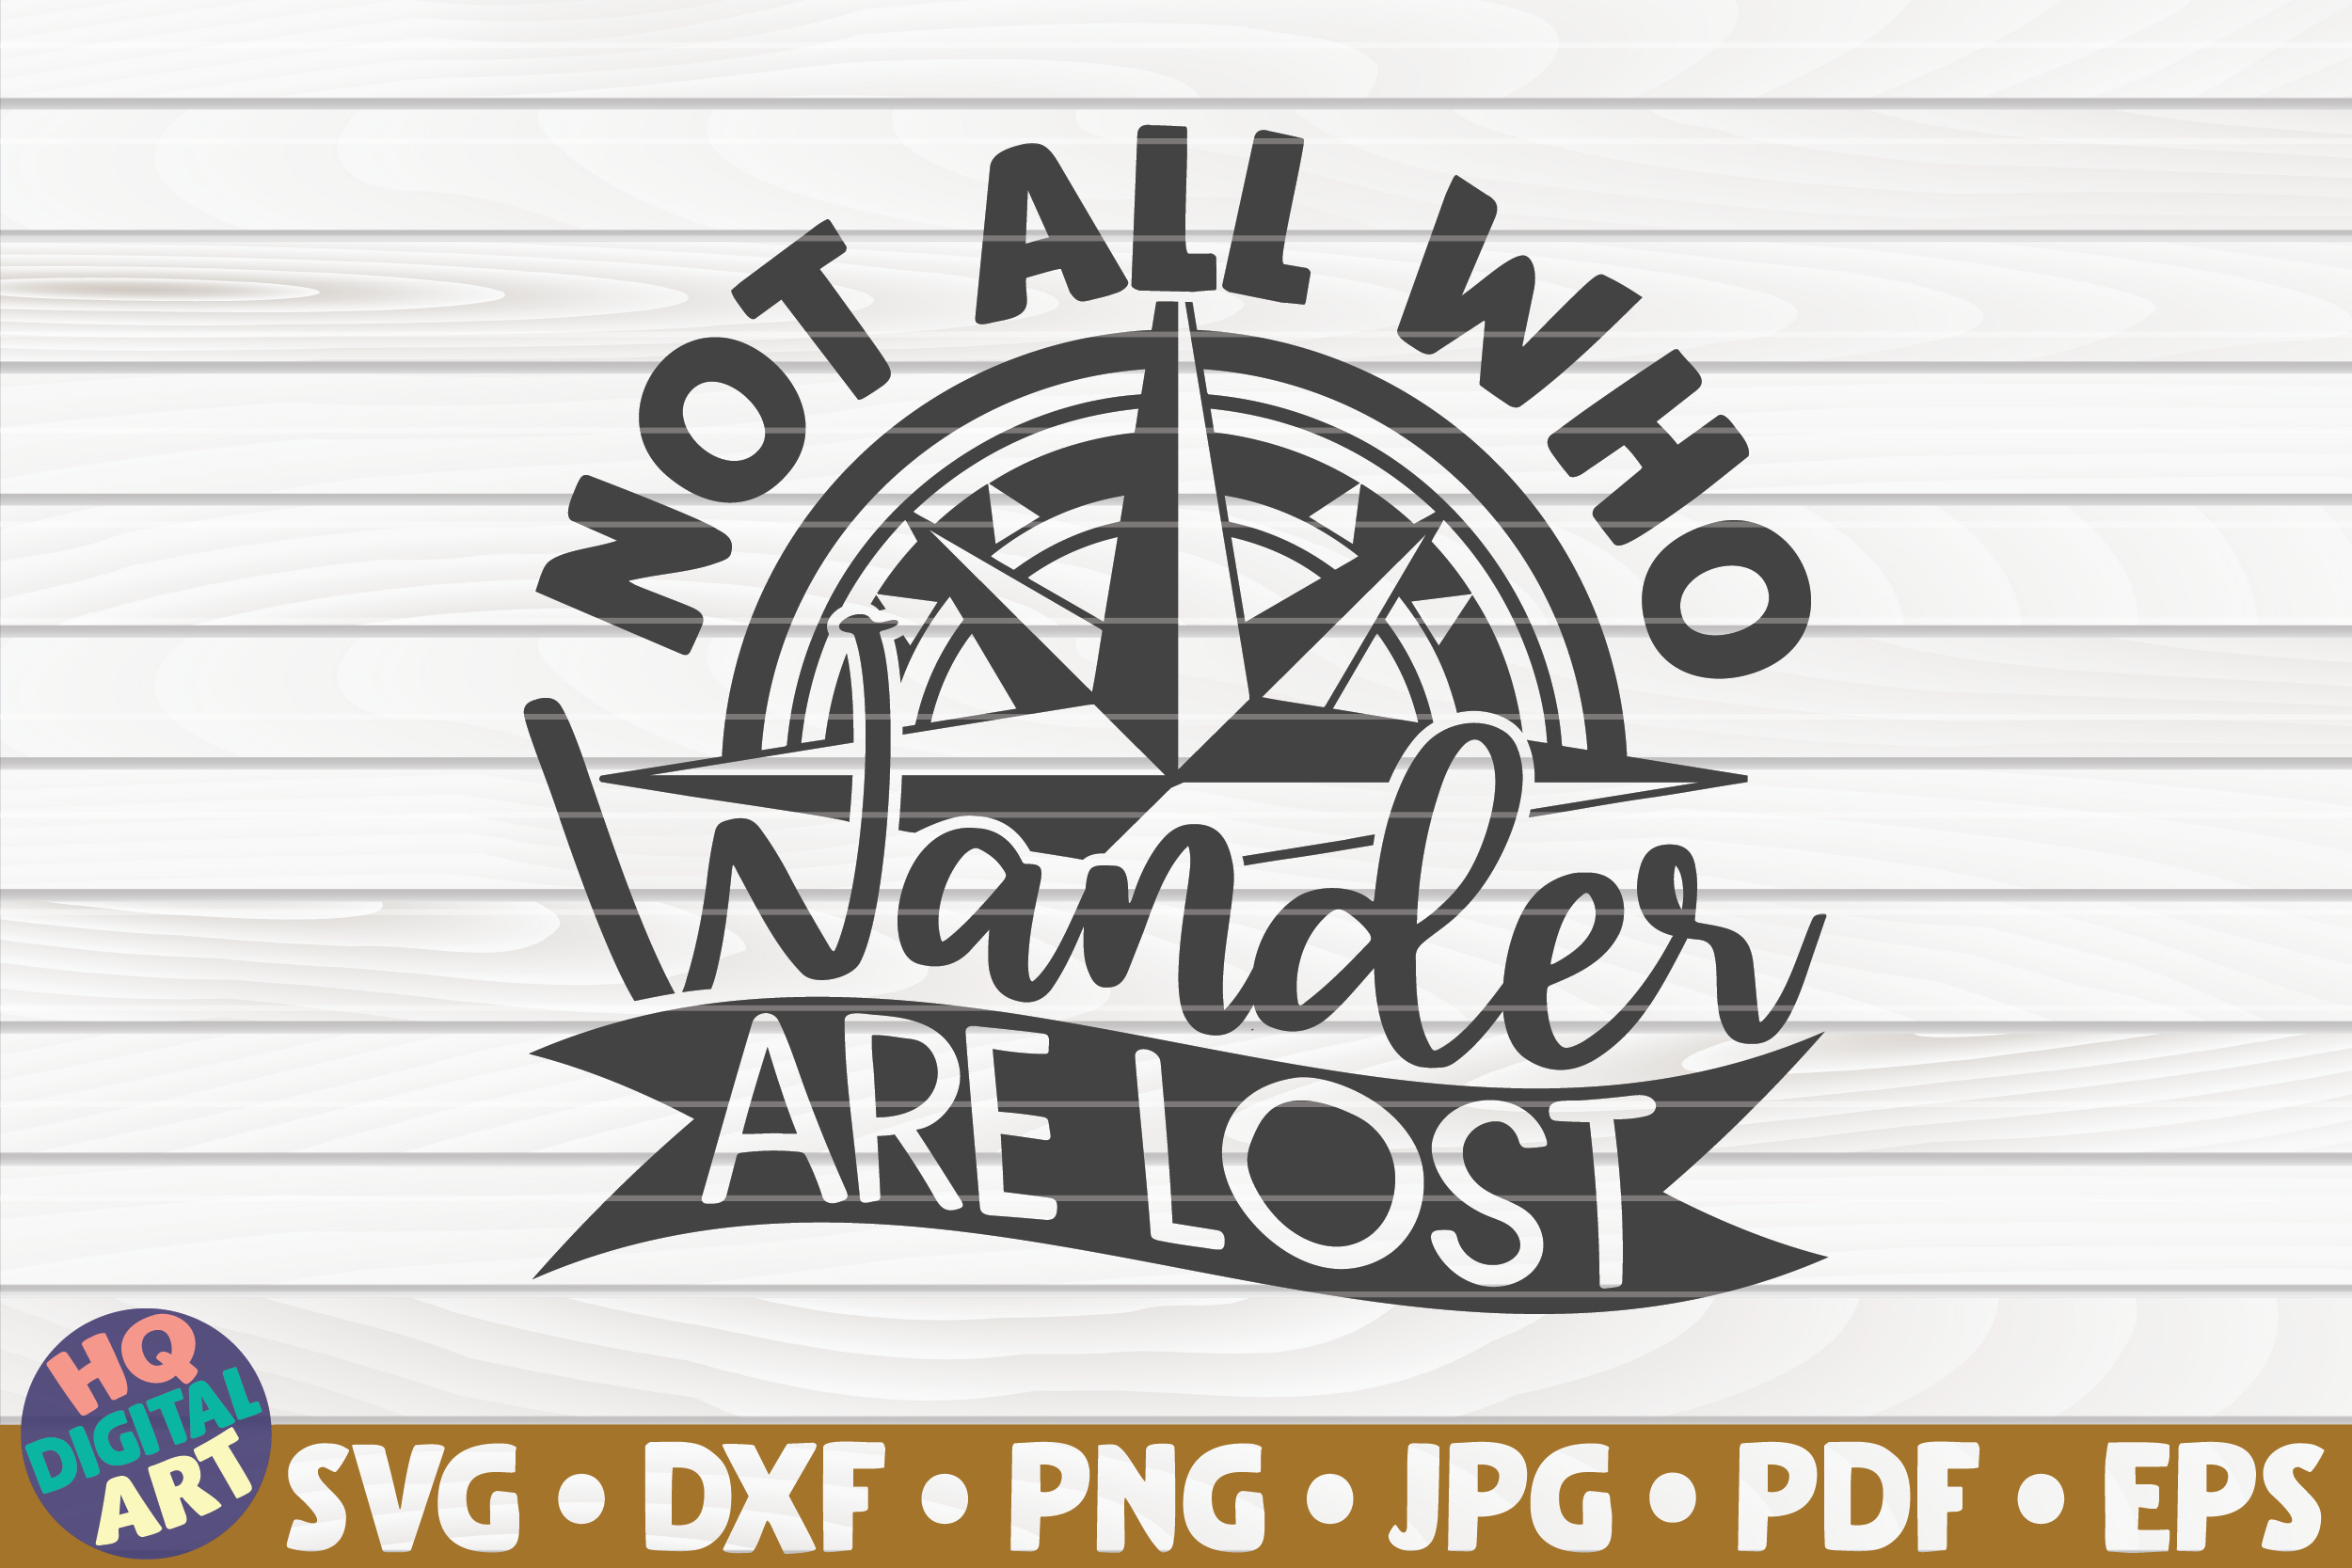 Not All Who Wander Are Lost Svg Travel Quote By Hqdigitalart Thehungryjpeg Com